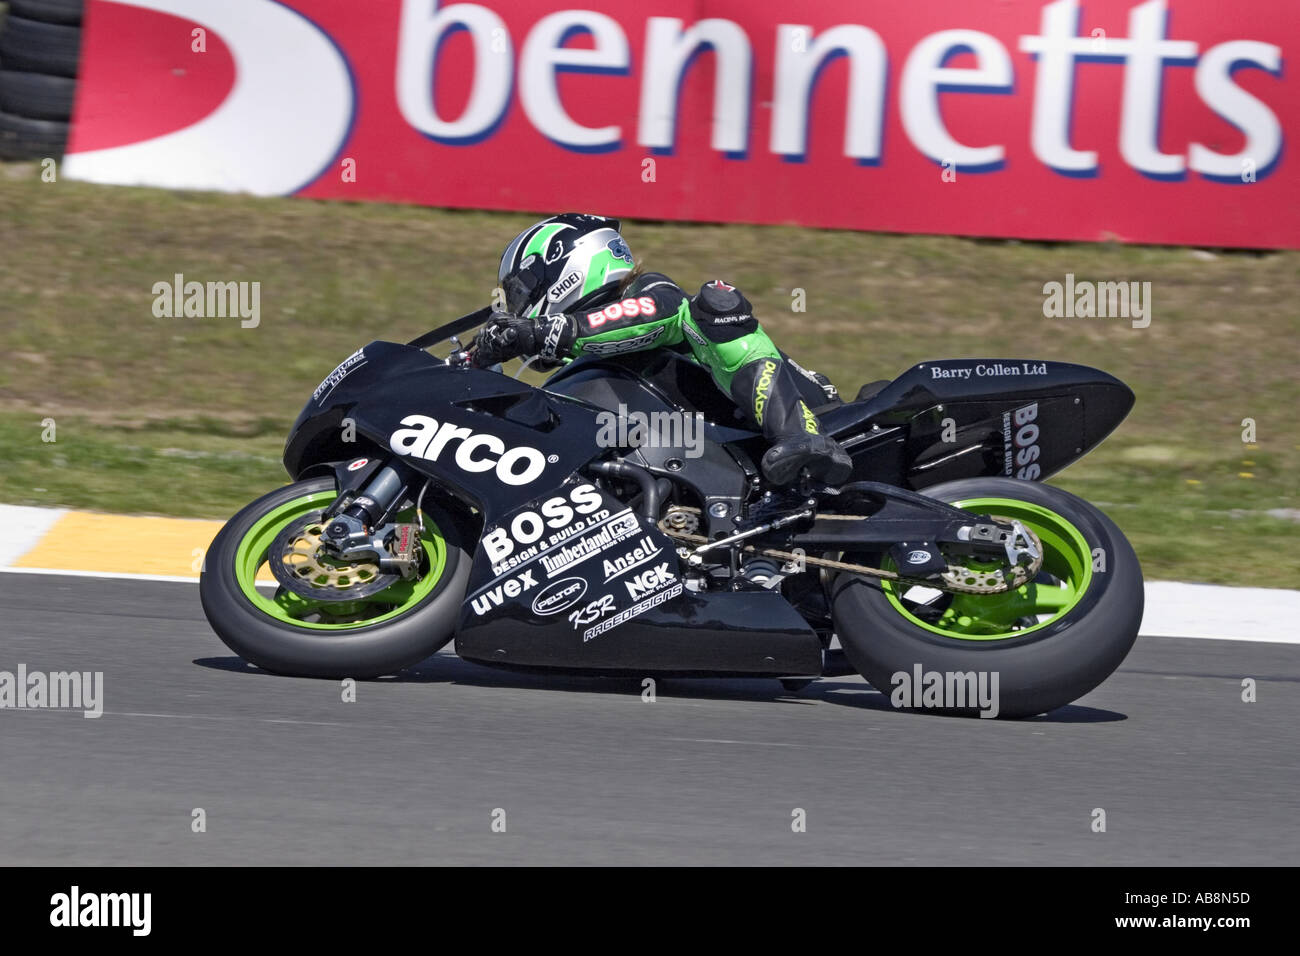 Nick Medd riding for Arco Medd Racing team at the Scottish round of the  British Superbike Championship 2005 Stock Photo - Alamy